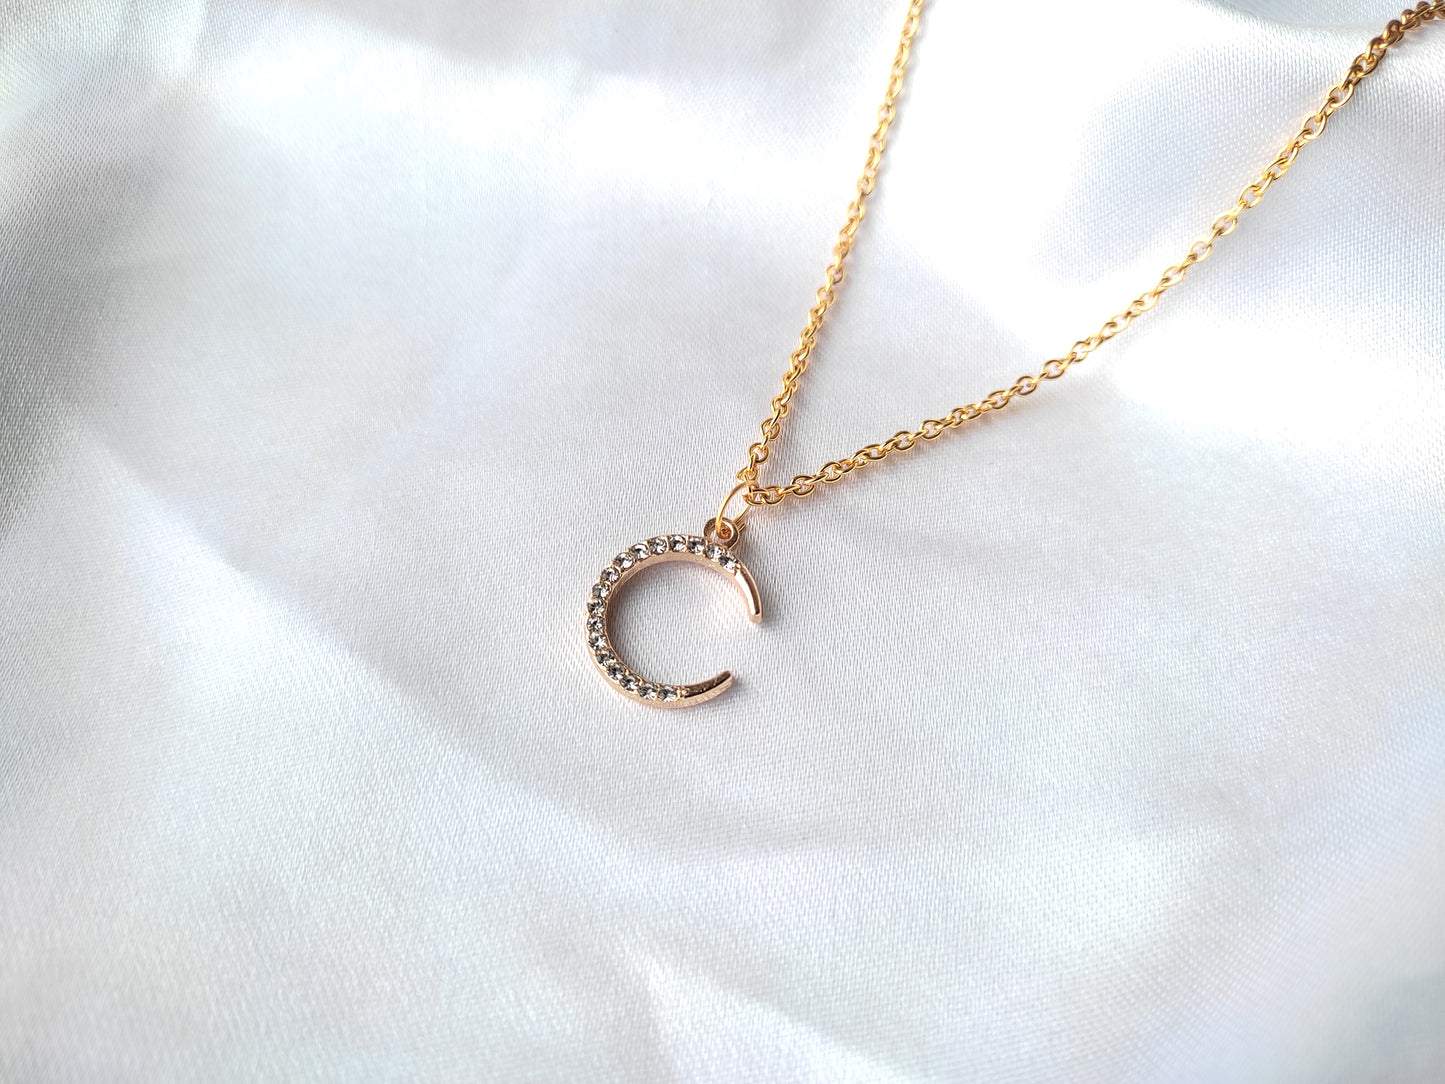 Stylish trendy Korean Gold Plated Moon AD stone charm pendant necklace for women and girls